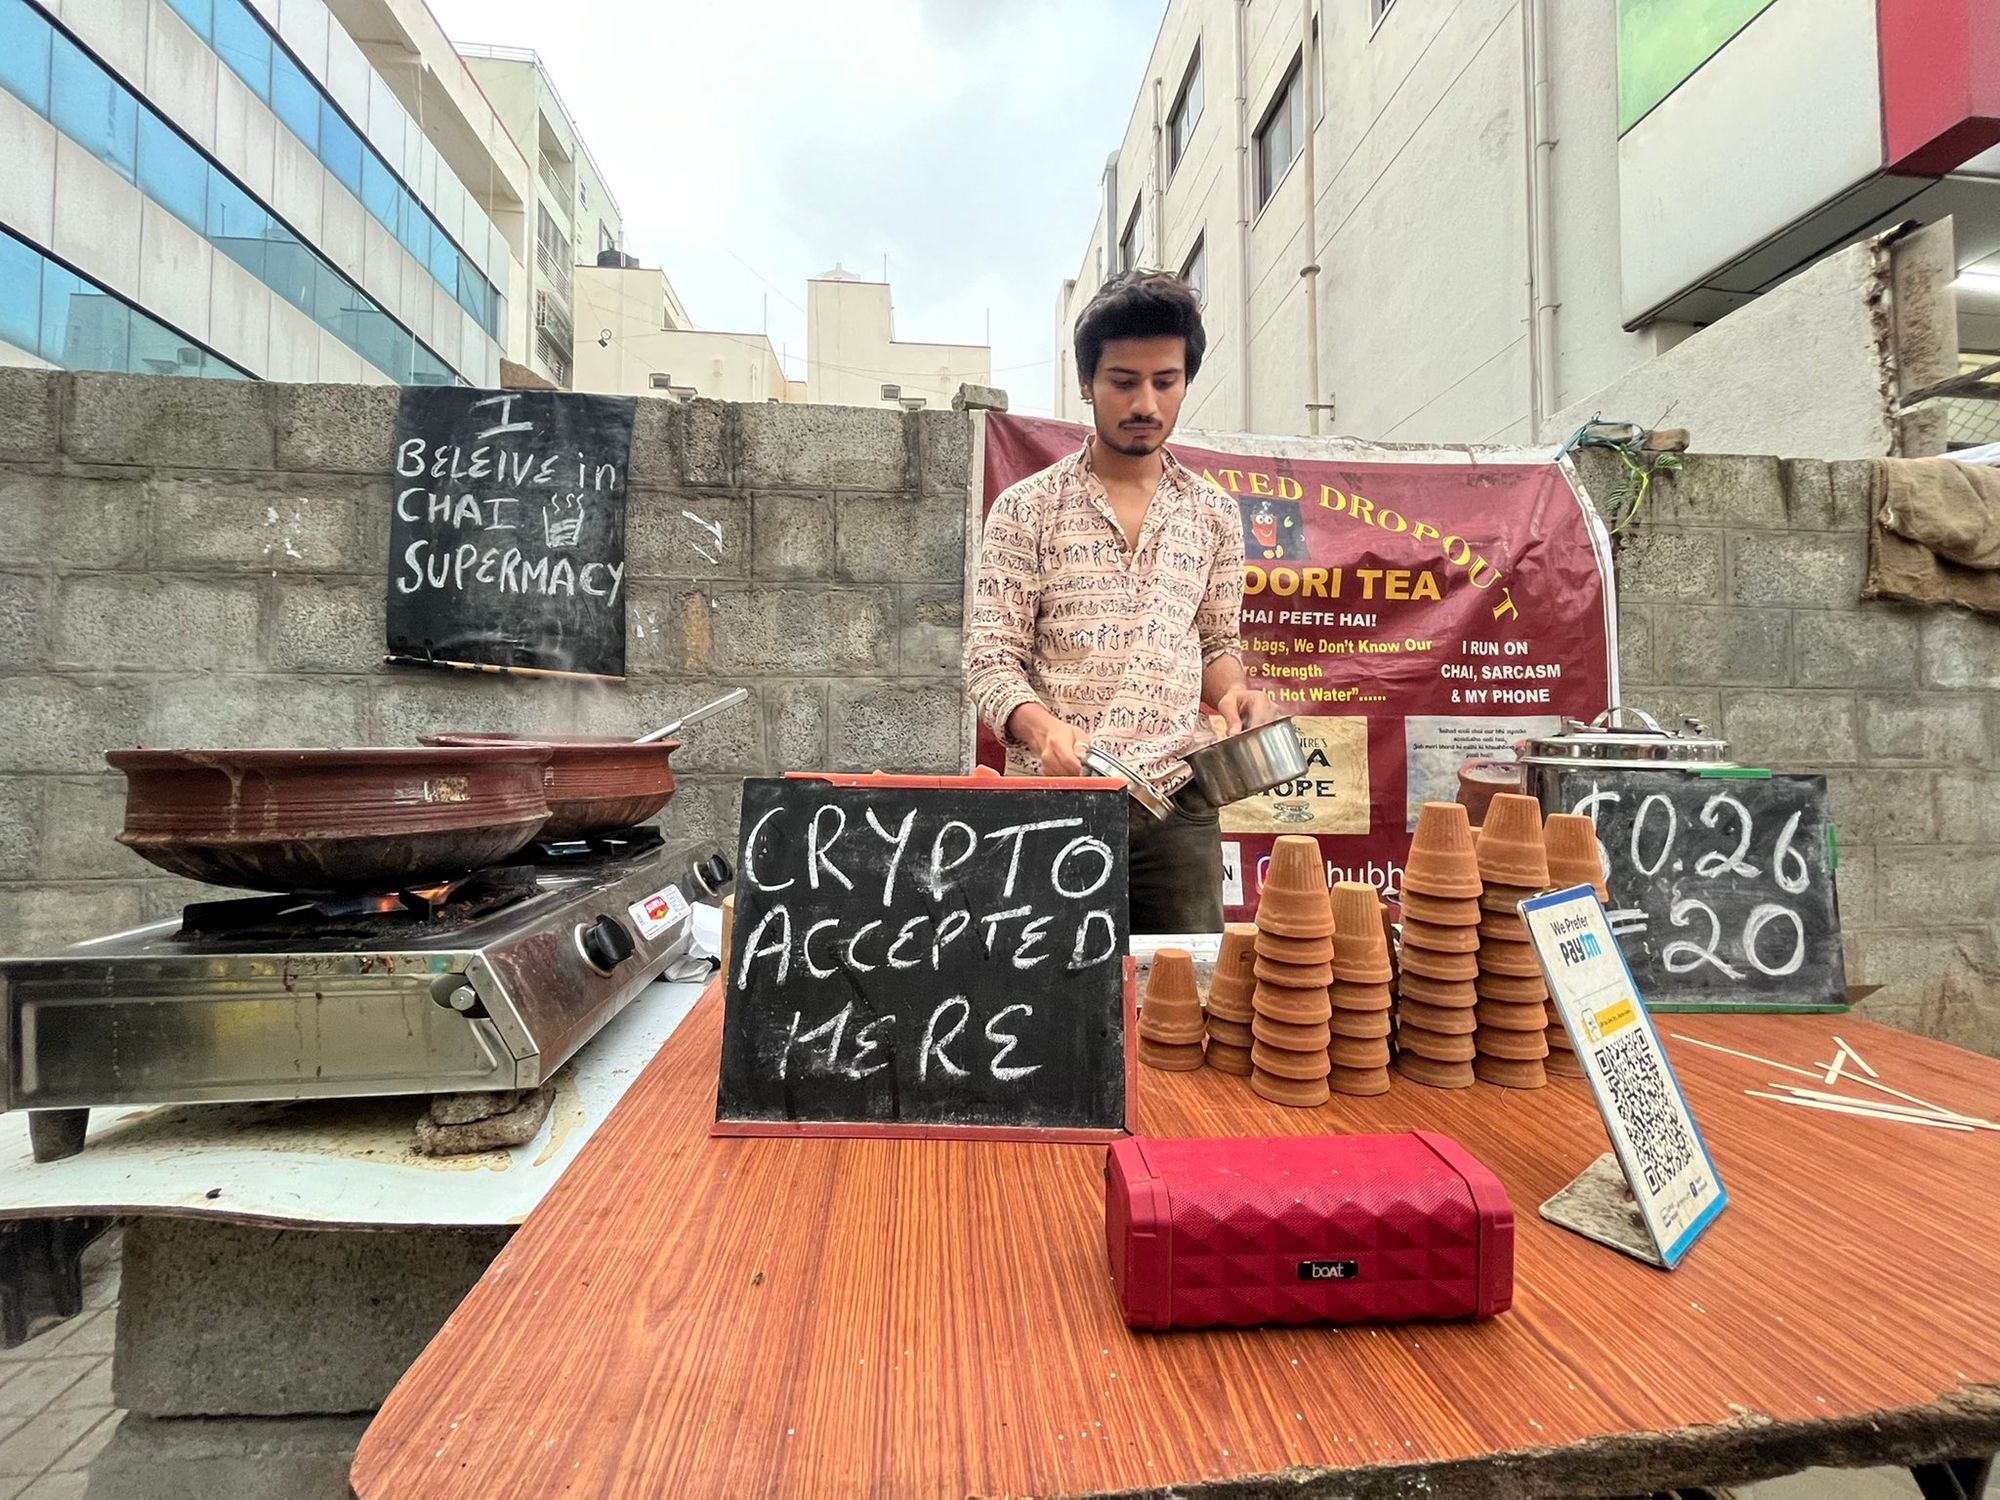 Bengaluru's tea vendor takes cryptocurrency payments, but is it making a profit?